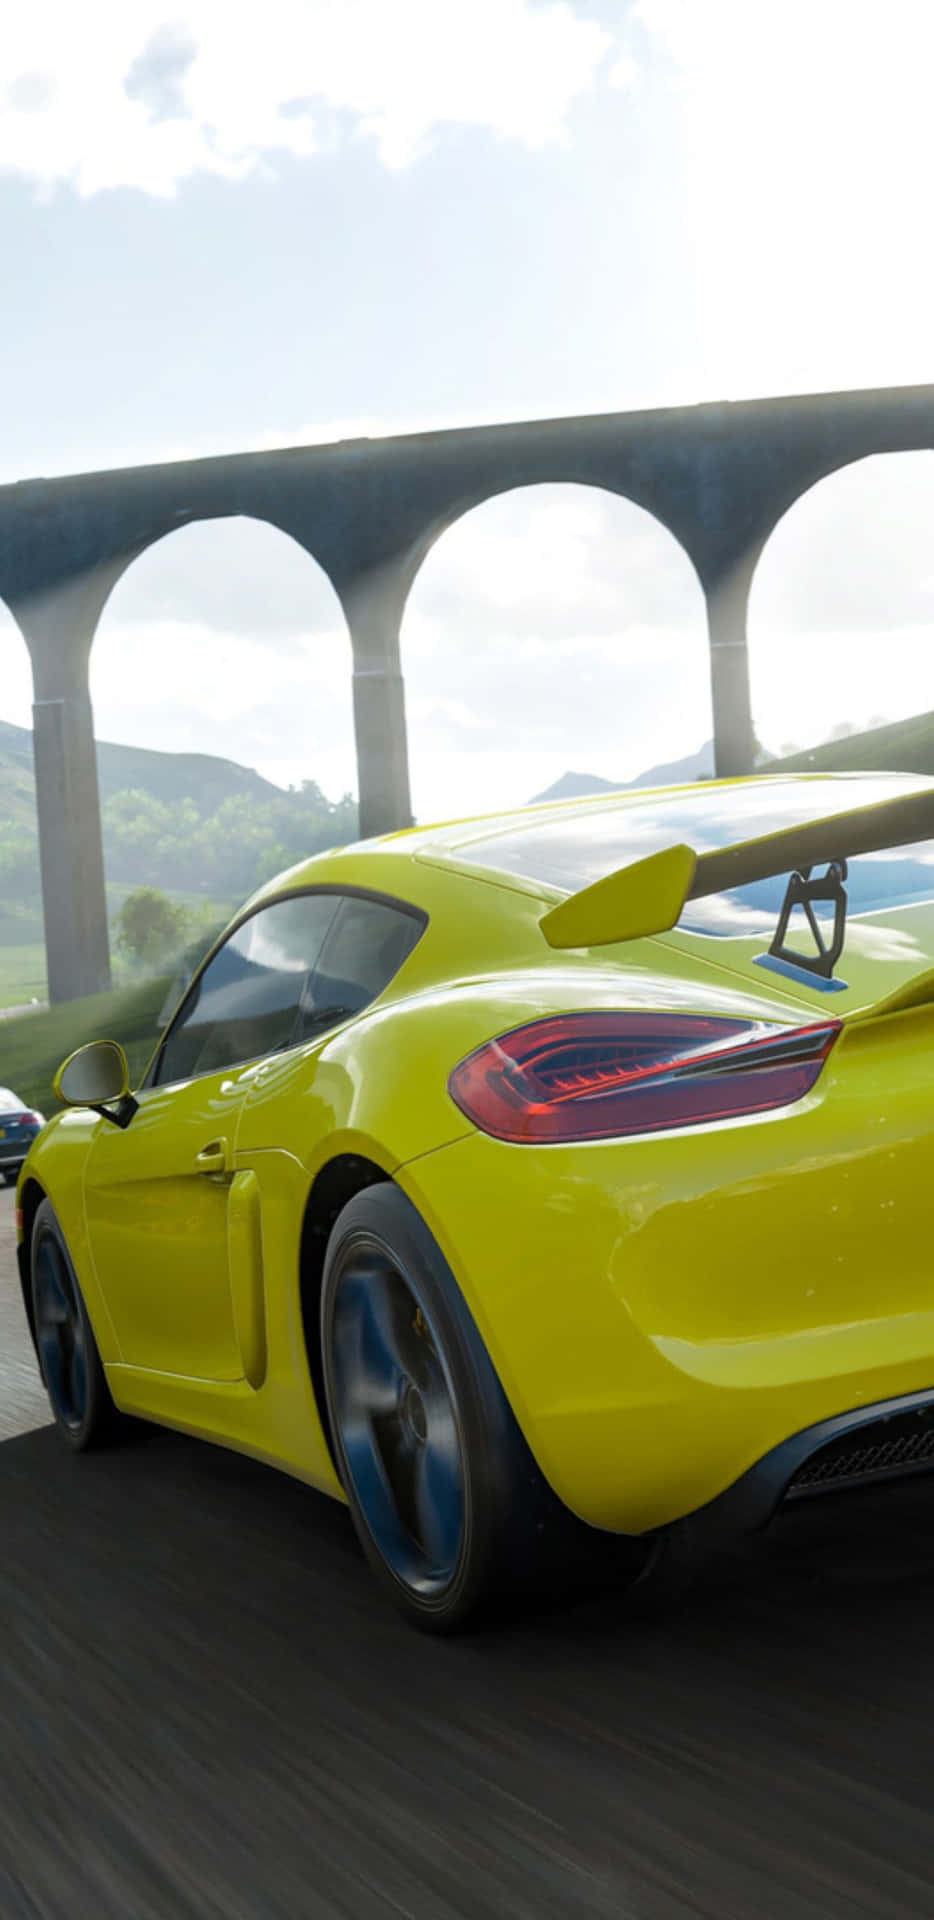 Explore the stunning open world of Forza Horizon 4 with the Pixel 3XL